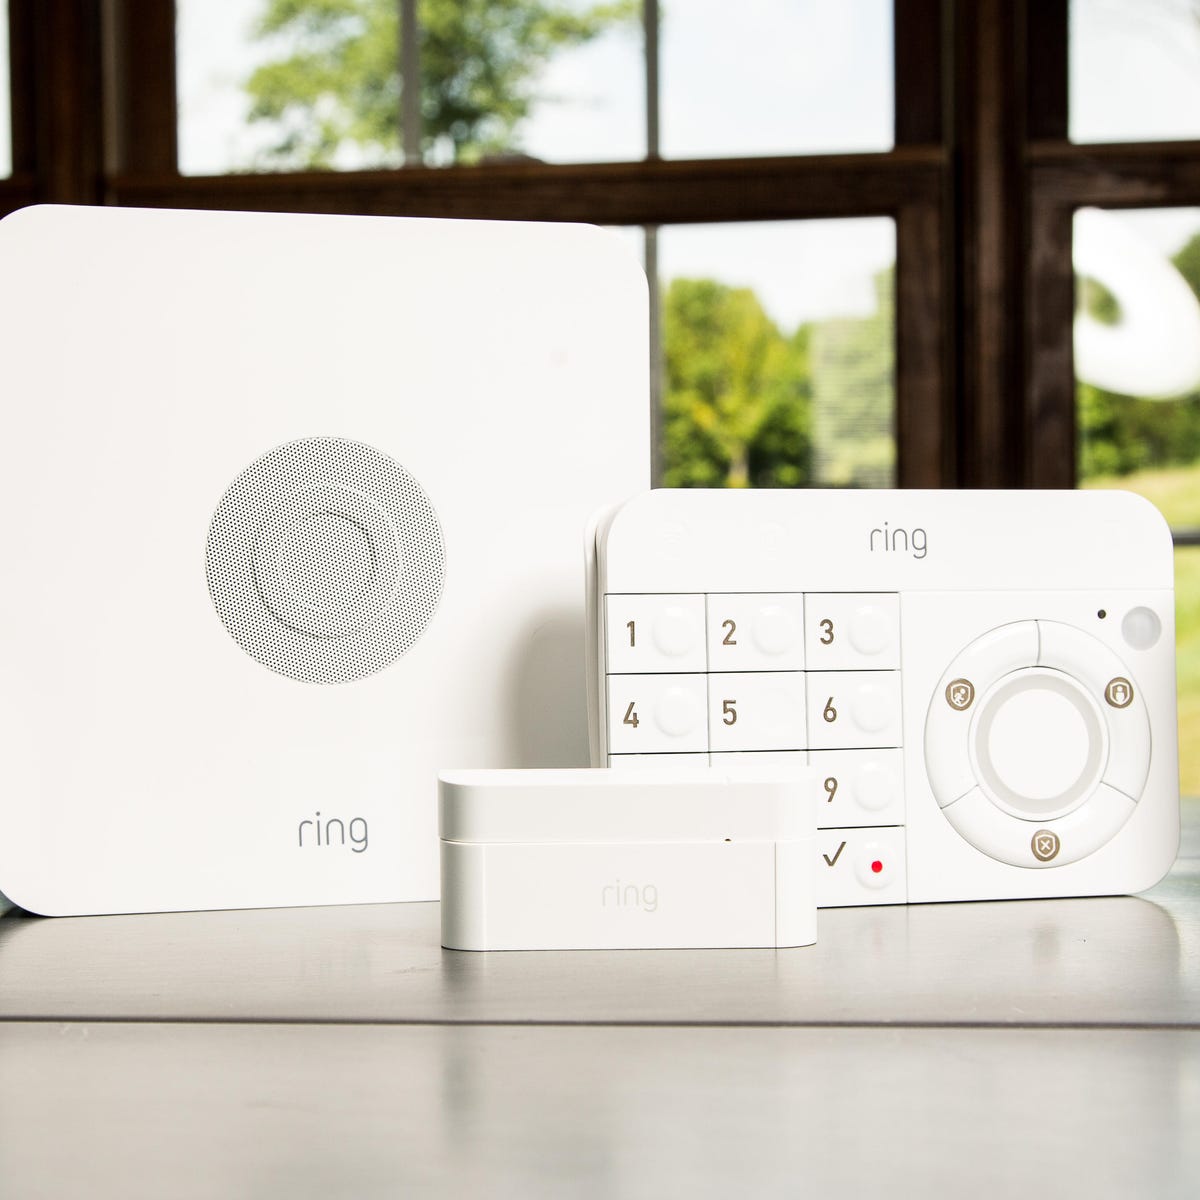 Ring Alarm Security Kit review: Ring's crazy-affordable DIY system nails  simple home security - CNET